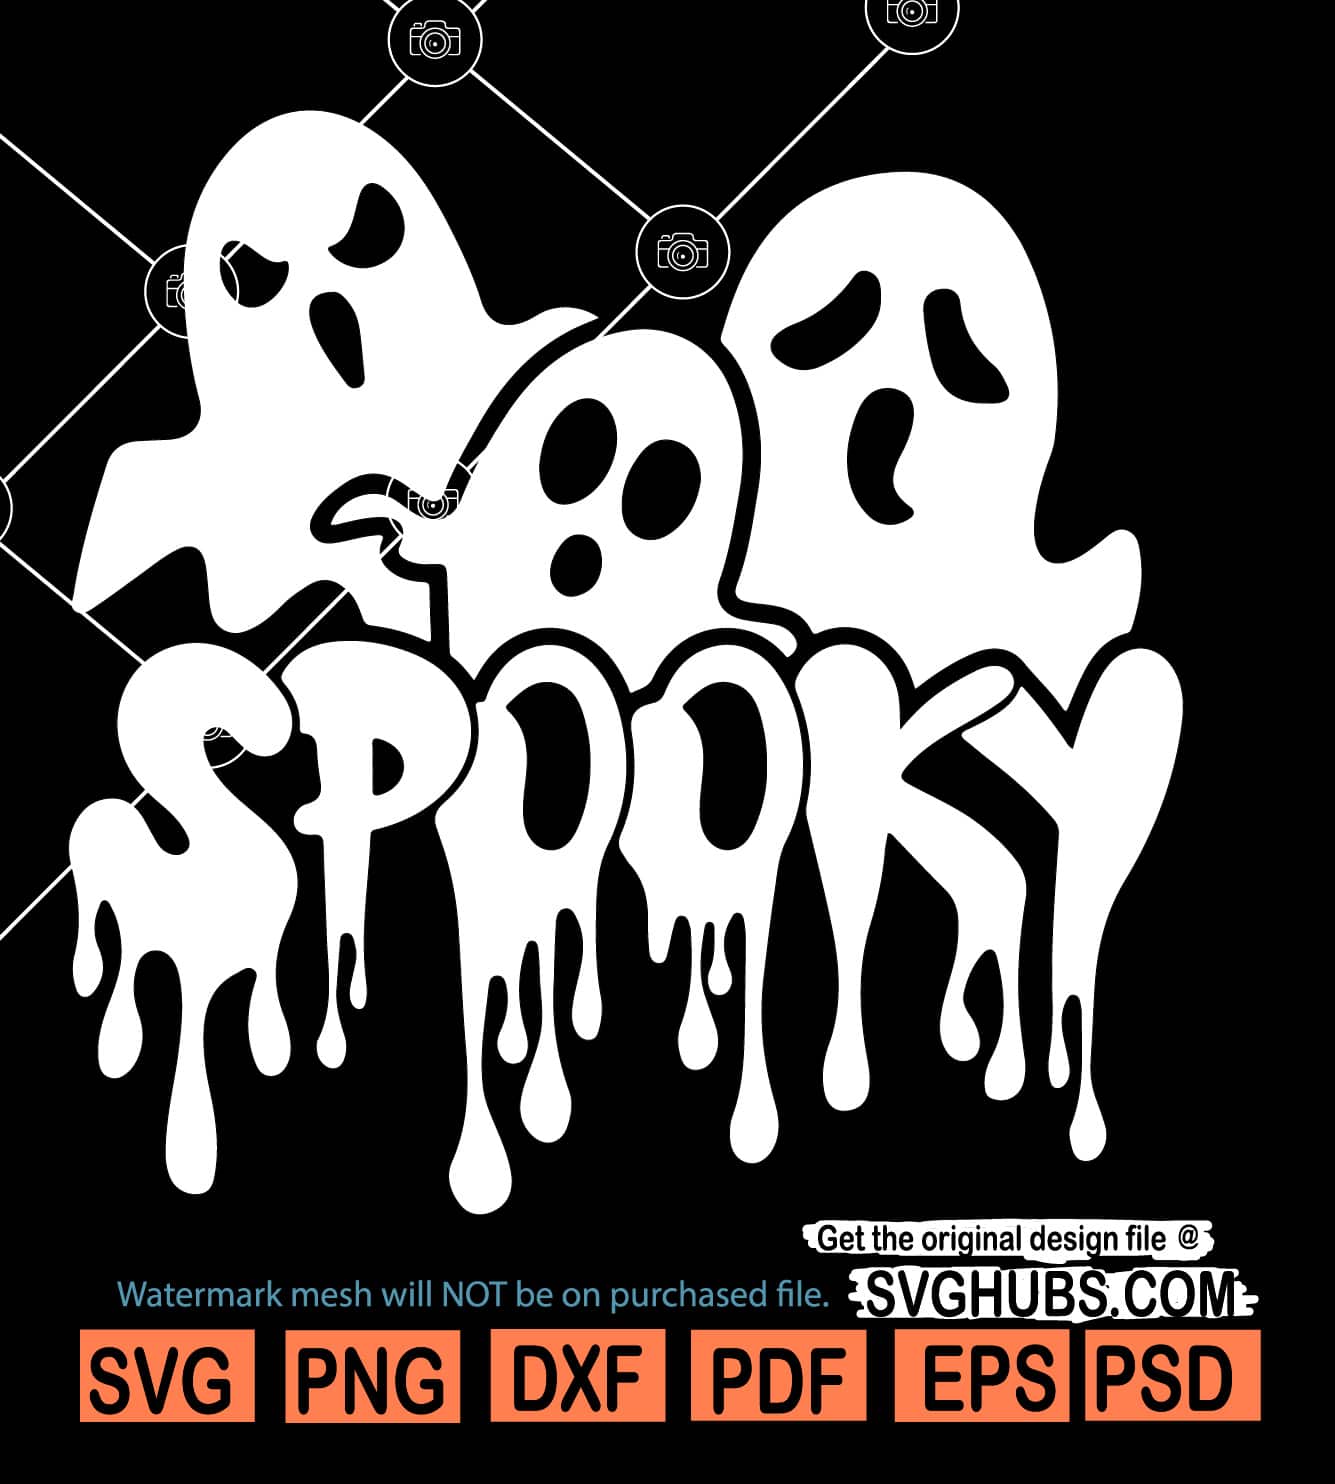 Halloween ghost SVG, spooky ghost SVG, Ghost drip svg, three ghosts svg